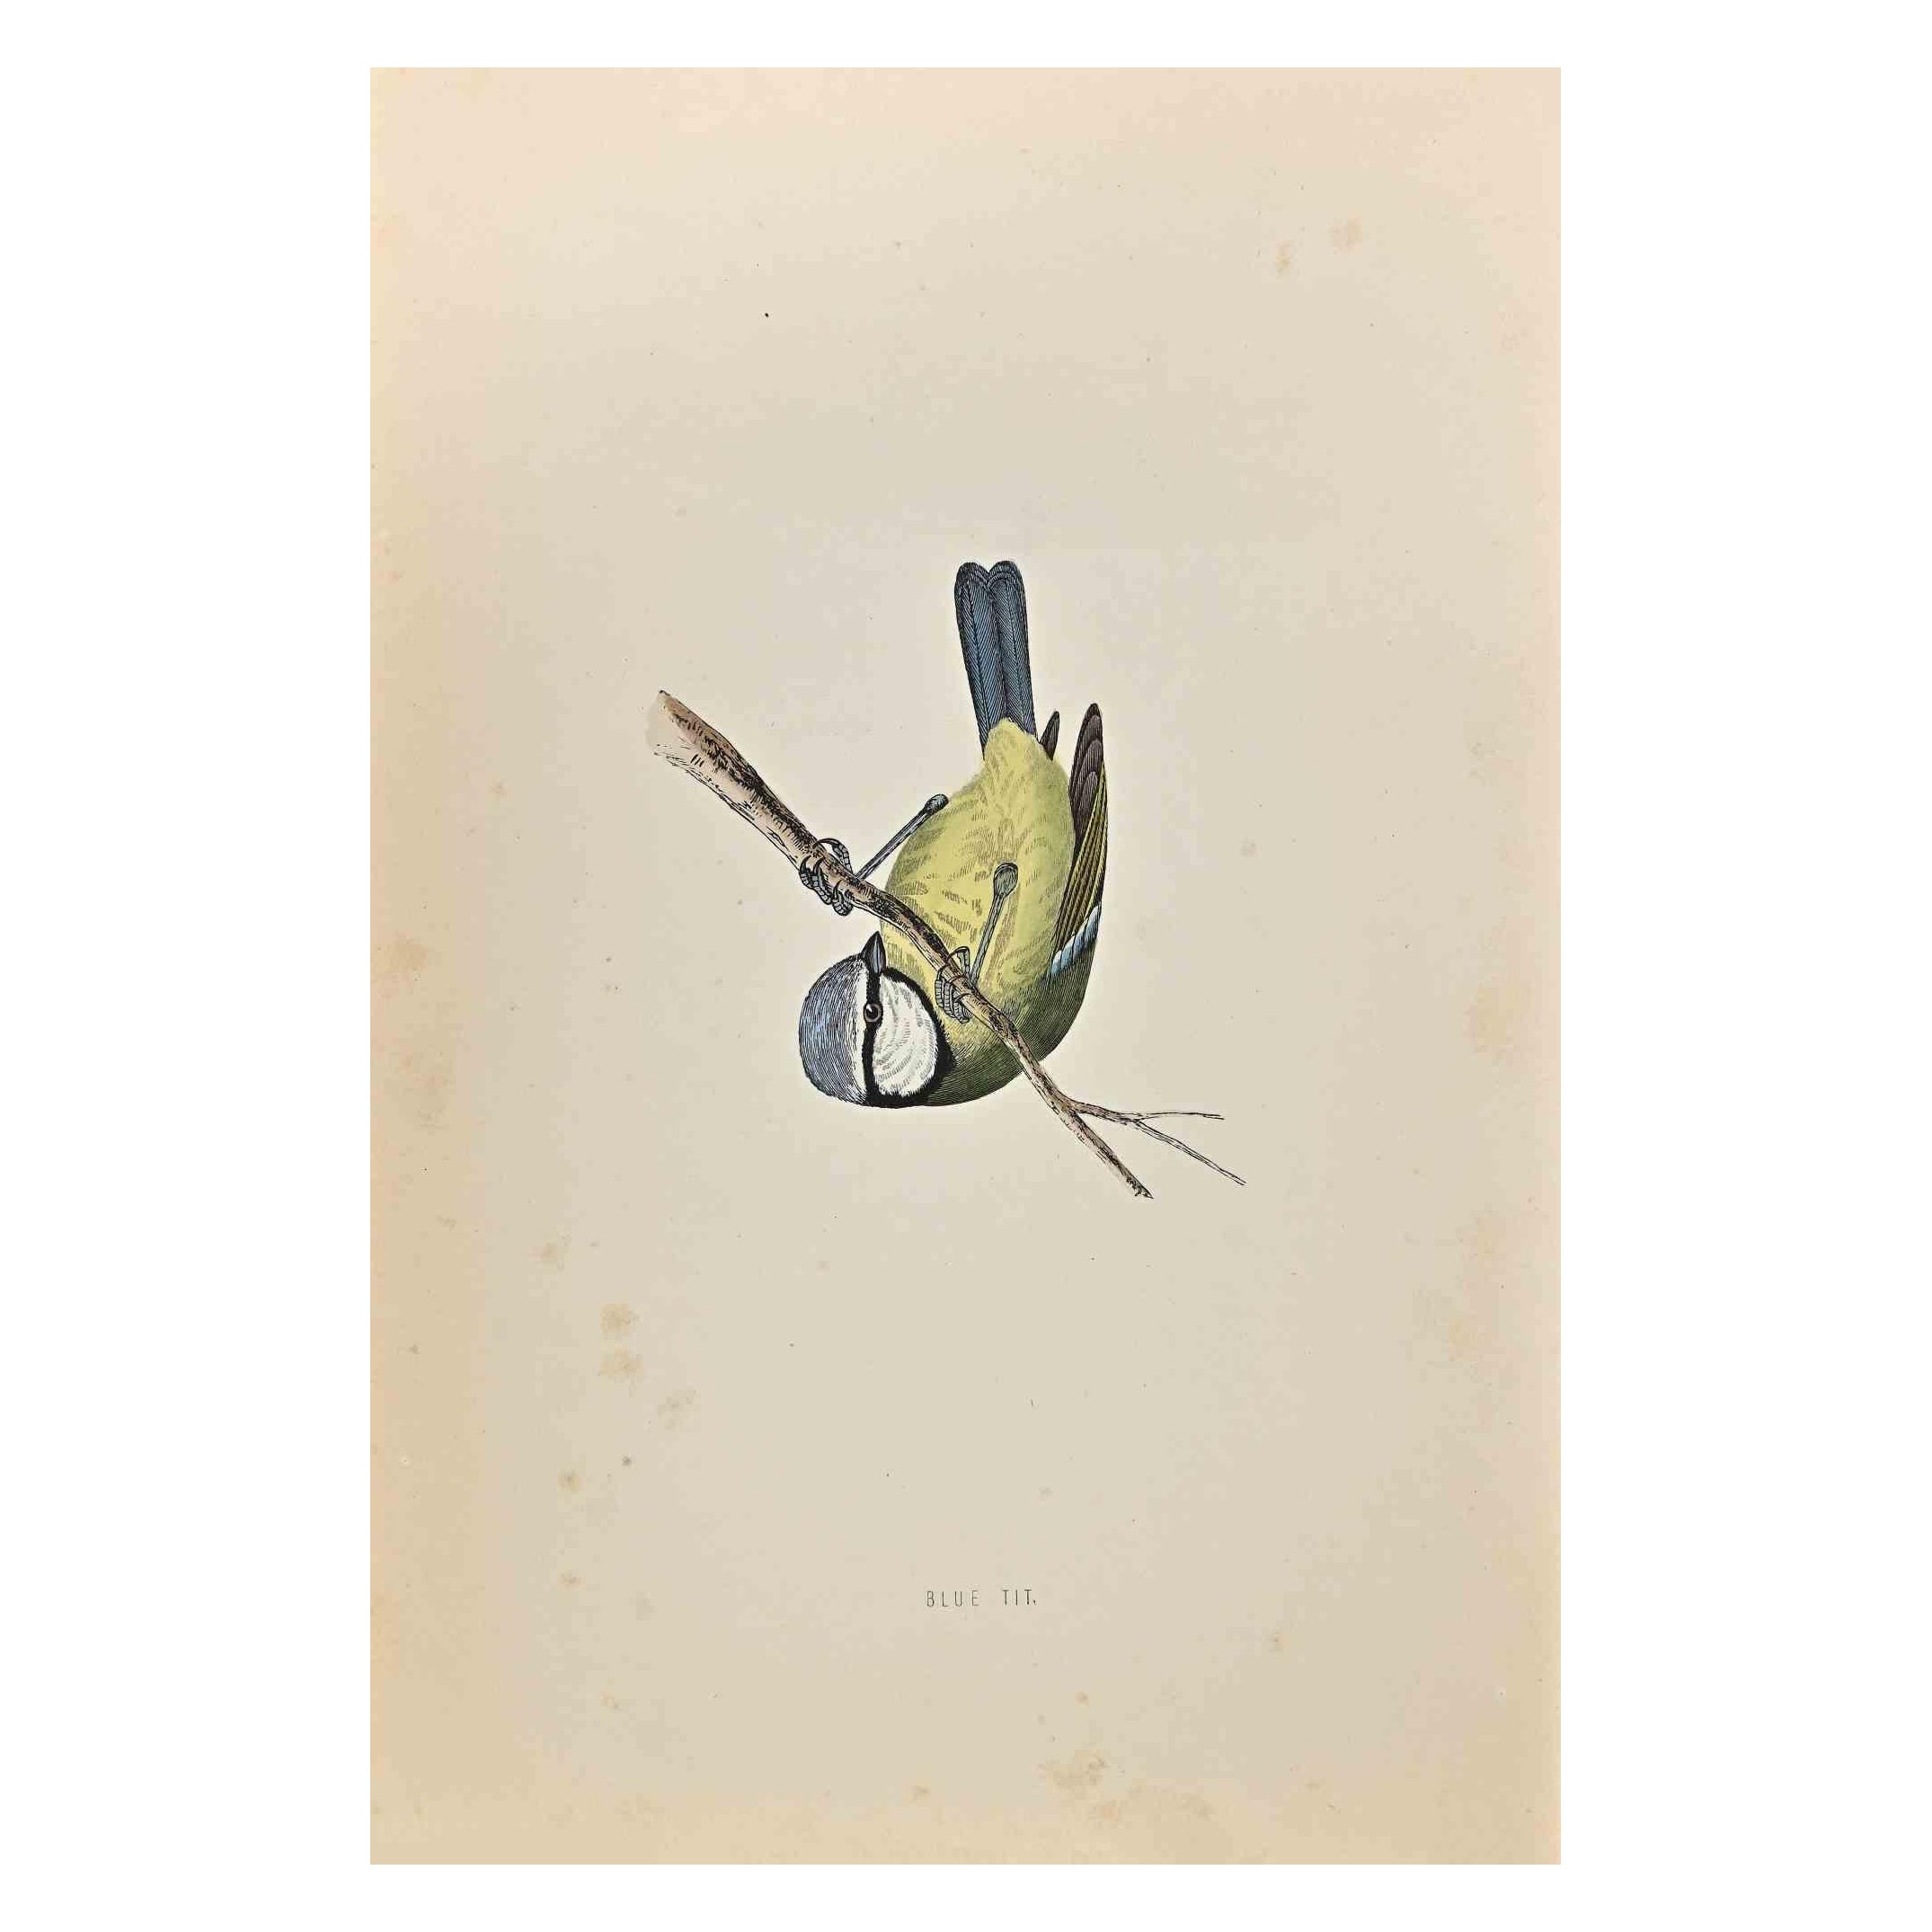 Blue Tit is a modern artwork realized in 1870 by the British artist Alexander Francis Lydon (1836-1917).

Woodcut print on ivory-colored paper.

Hand-colored, published by London, Bell & Sons, 1870.  

The name of the bird is printed on the plate.